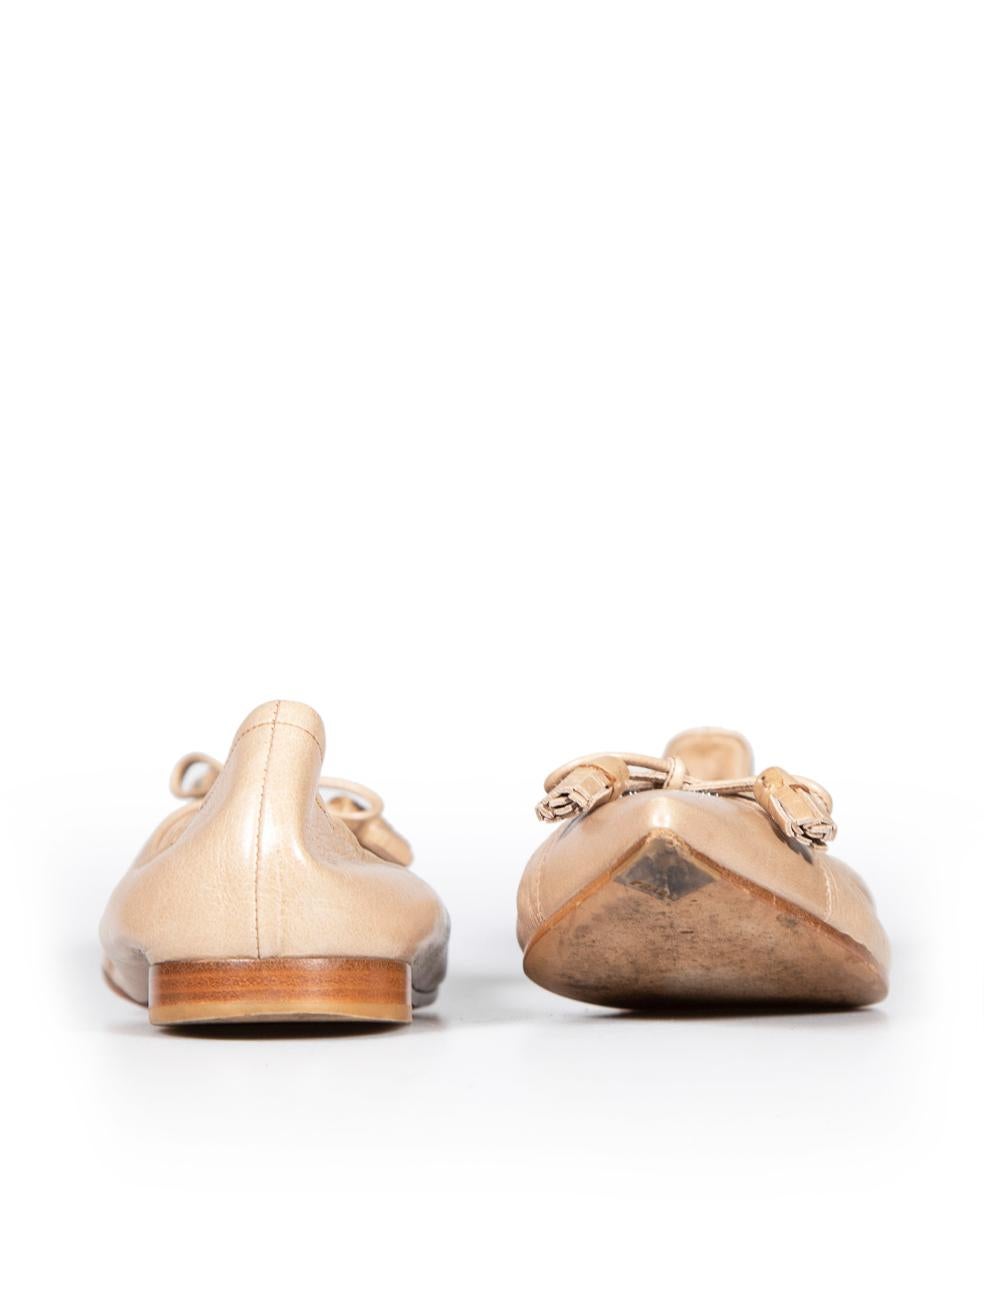 Prada Beige Leather Bow Detail Flats Size IT 37.5 In Good Condition For Sale In London, GB